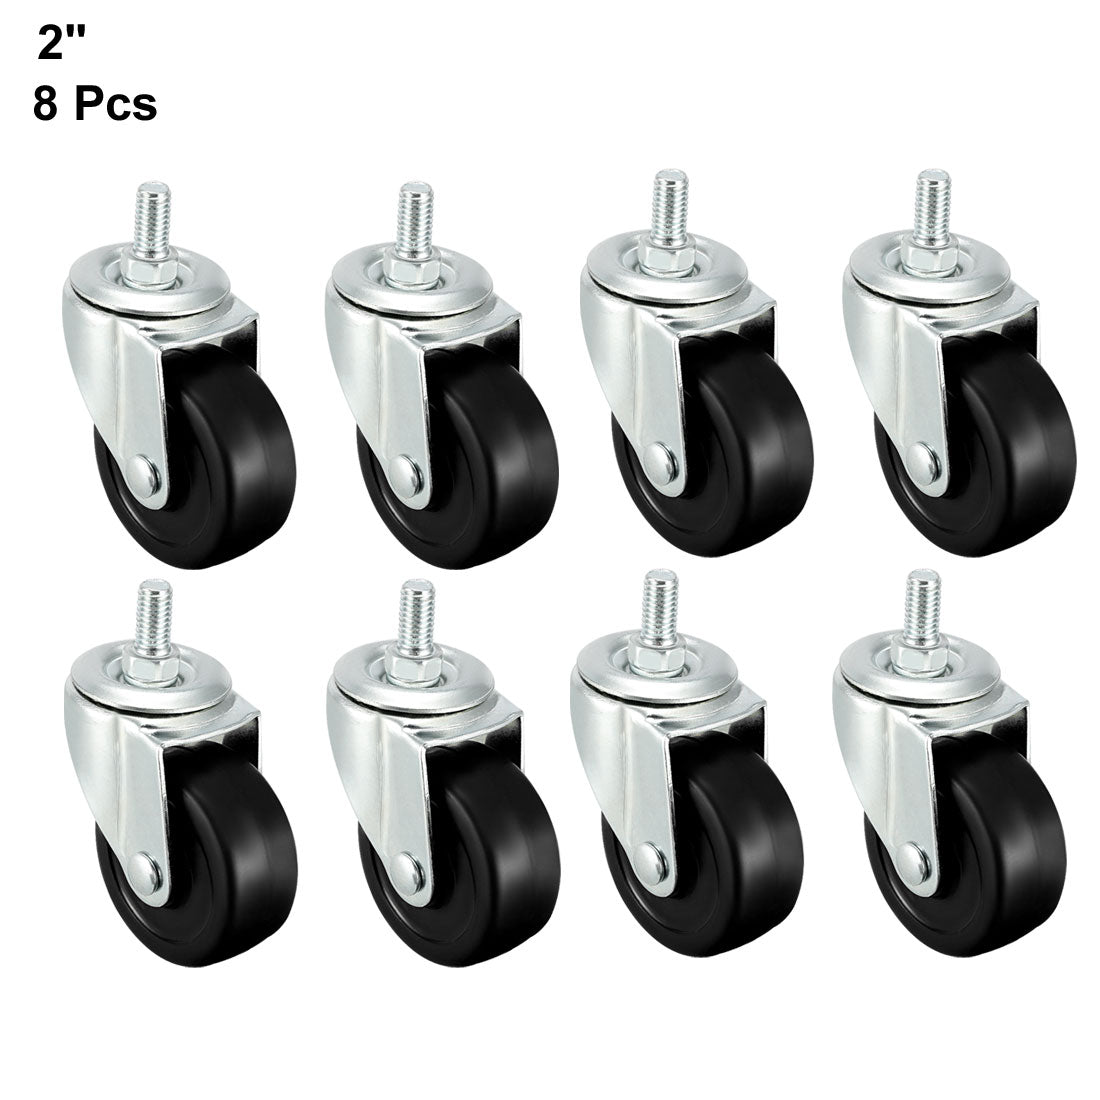 Uxcell Uxcell Swivel Casters 2 Inch Solid Rubber M8 x 15mm Screw Threaded Caster Wheels Black 8 Pcs